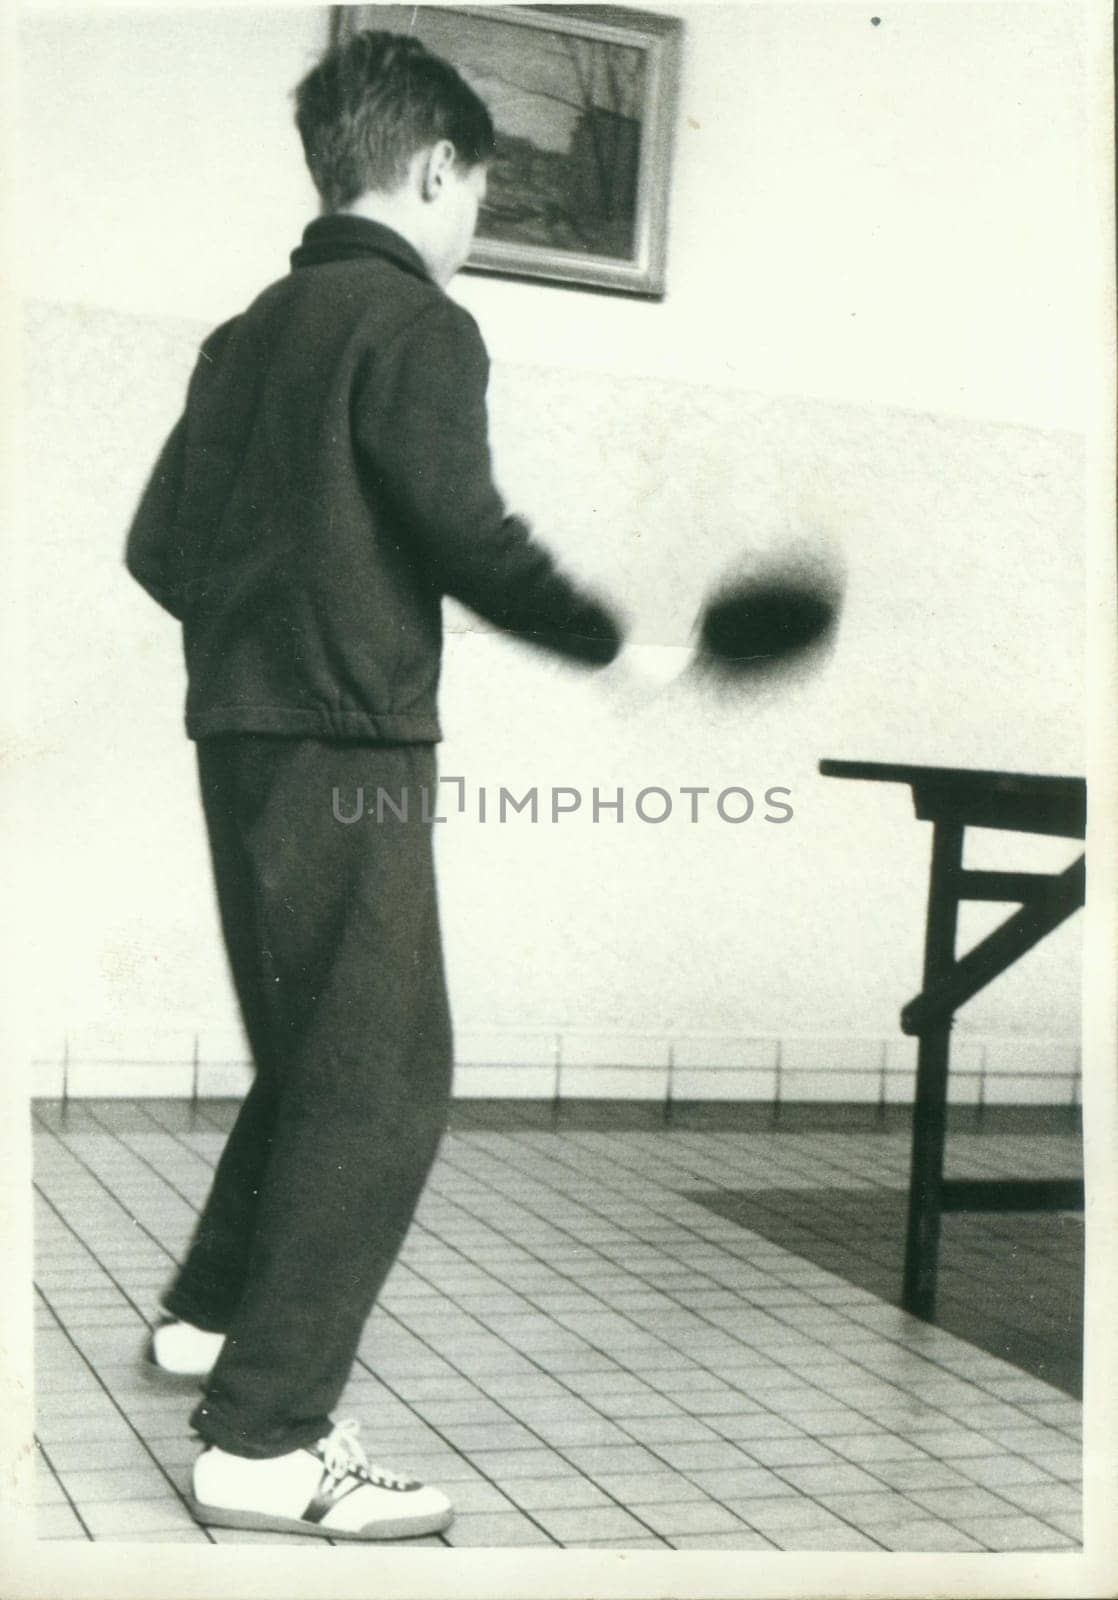 THE CZECHOSLOVAK SOCIALIST REPUBLIC - CIRCA 1980s: Retro photo shows young boy plays table tennis - ping-pong. Vintage black and white photography.